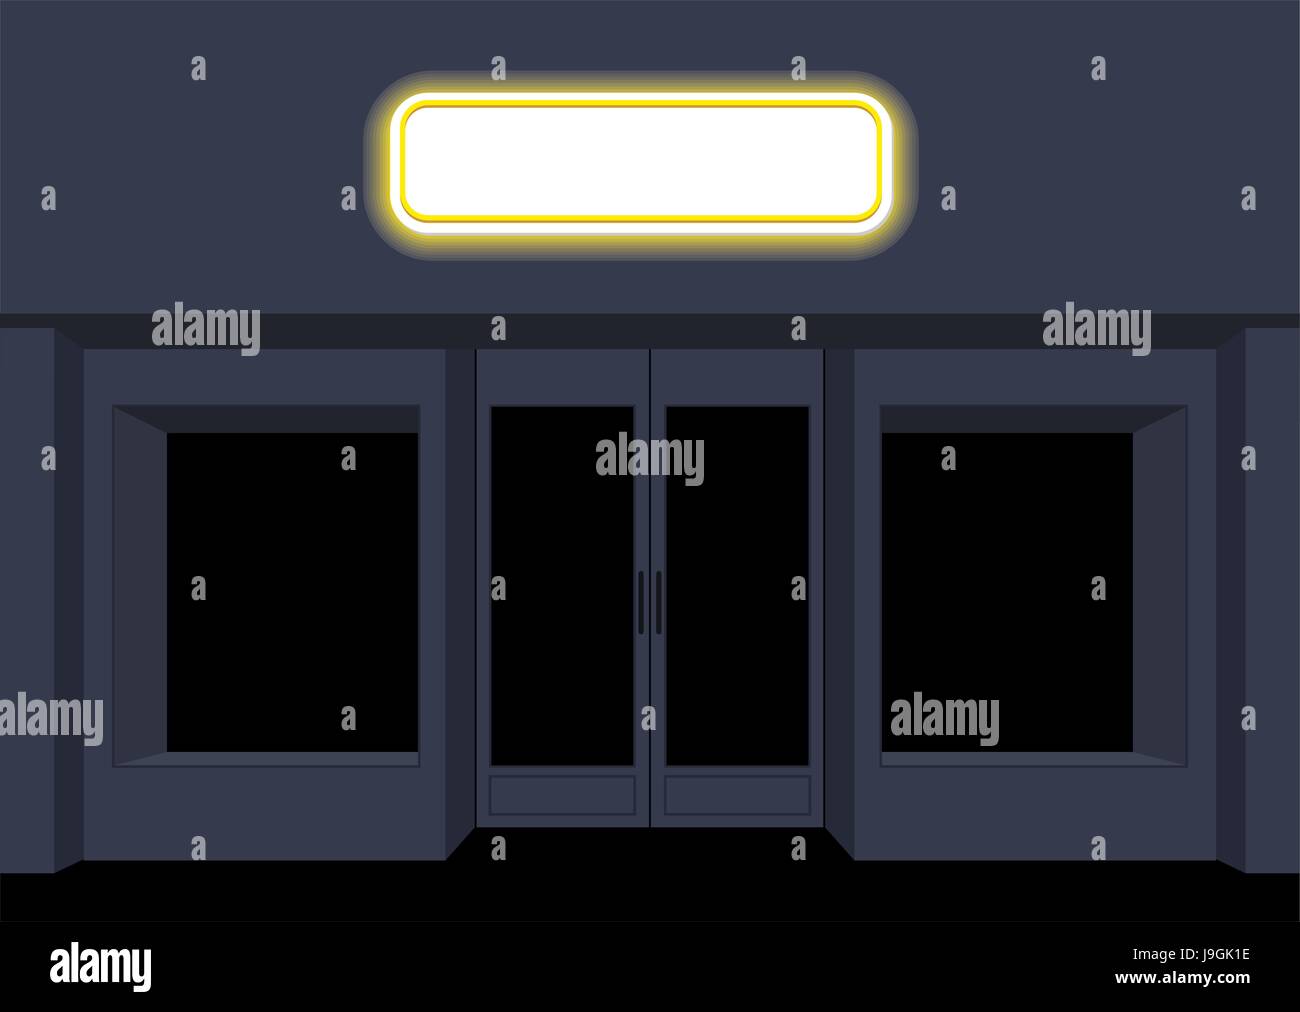 Night shop. Convenience store. Storefront at night. Empty black counters. Shining sign on facade of store. Stock Vector